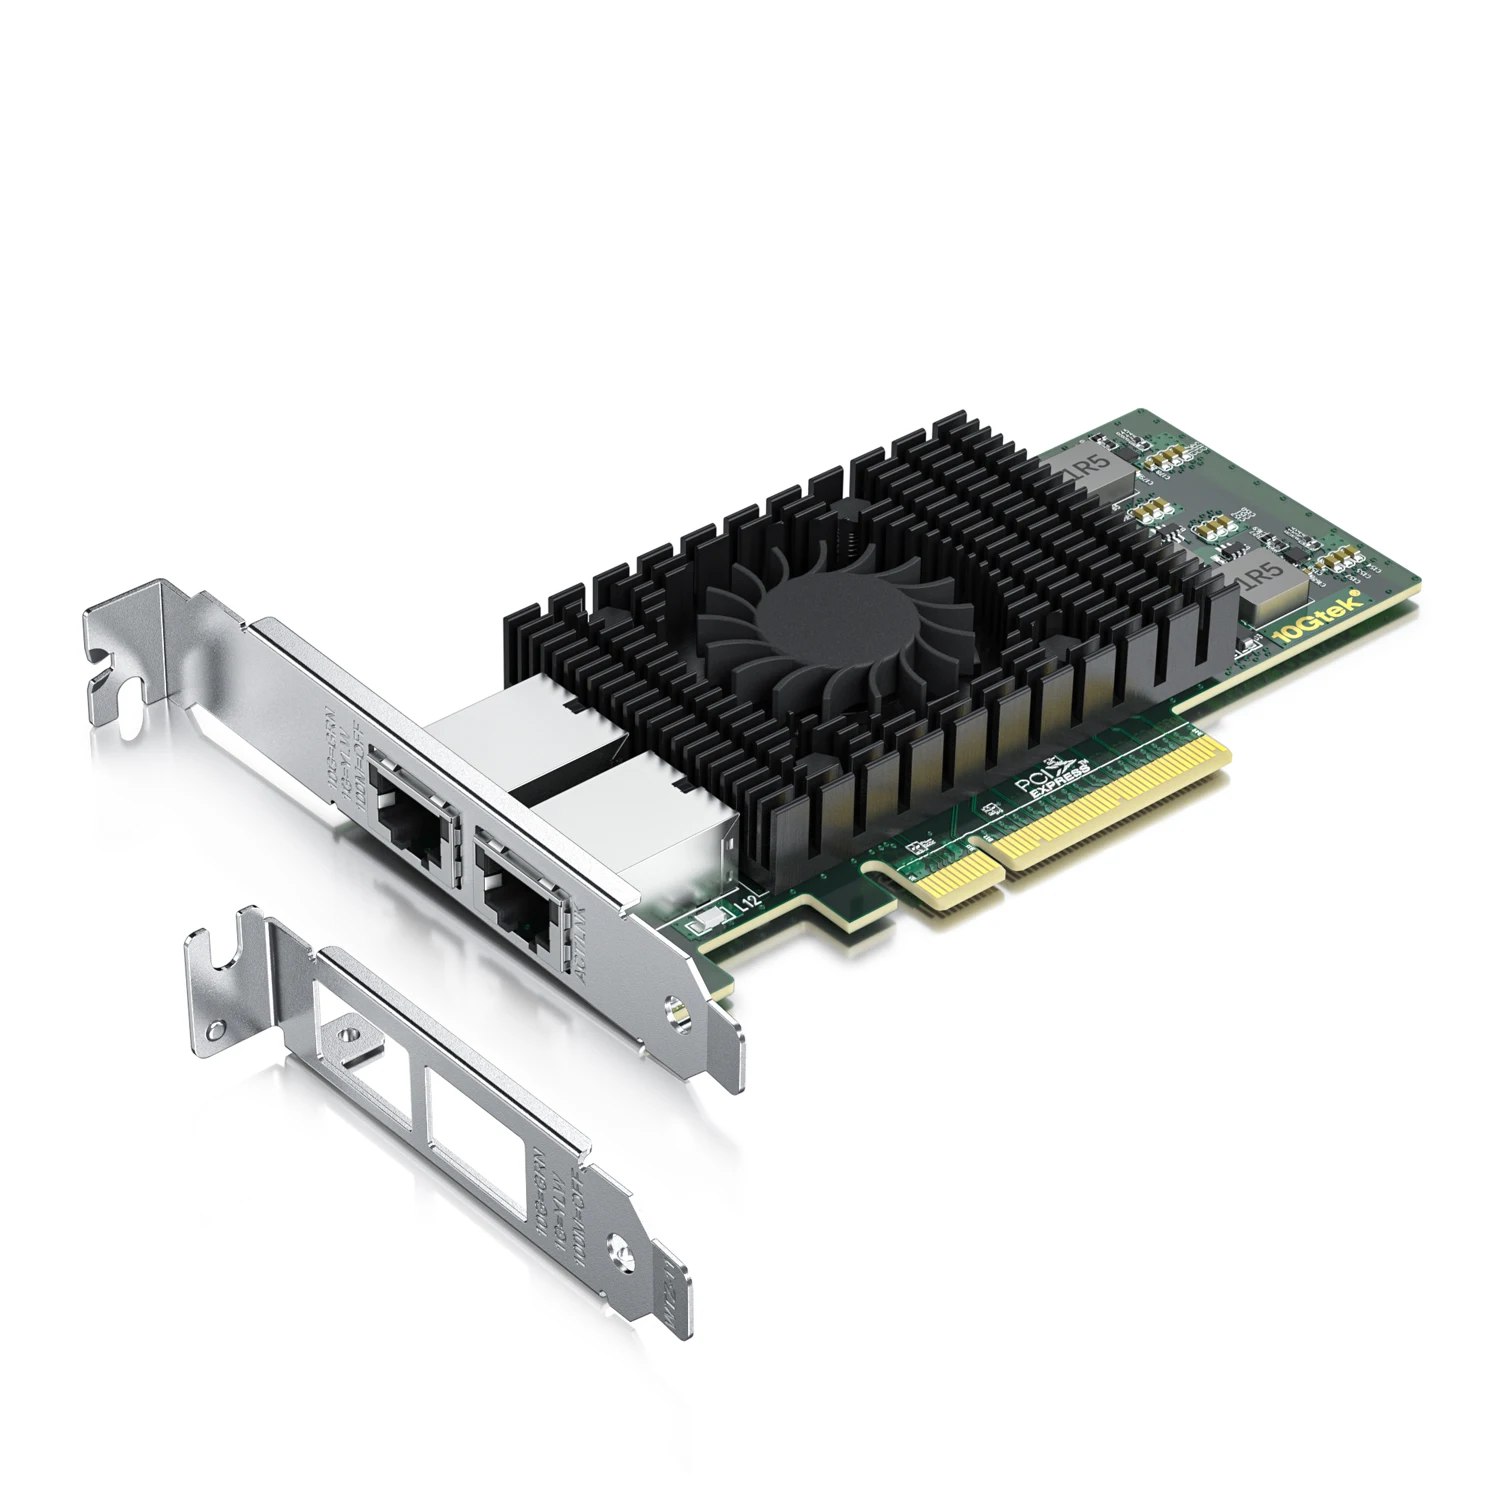 10Gb PCI-E NIC Network Card, PCI Express Ethernet LAN Adapter Support Windows Server/Windows/Linux/ESX, Compare to Intel X540-T2 10gb pci e nic network card pci express ethernet lan adapter support windows server linux esx compare to intel x550 t2